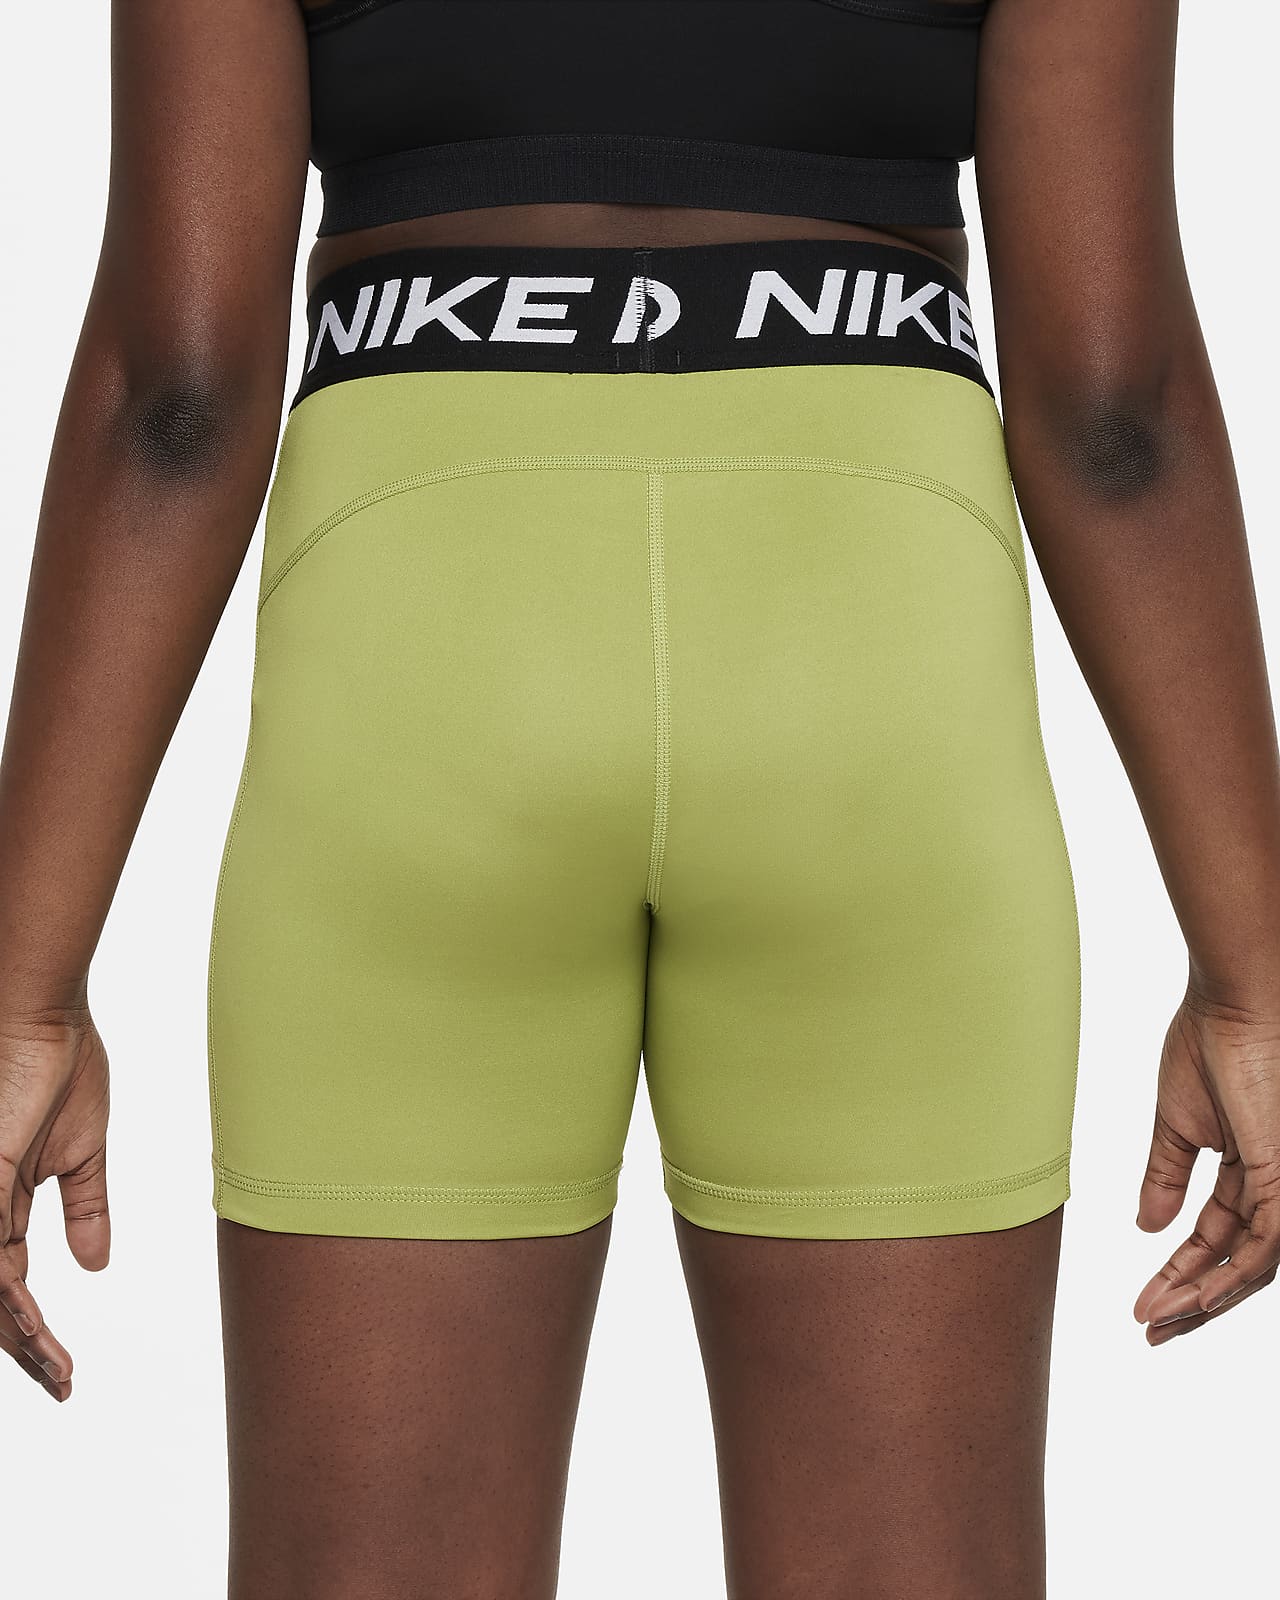 Girls Nike Shorts: Stay Active In Kids Nike Shorts